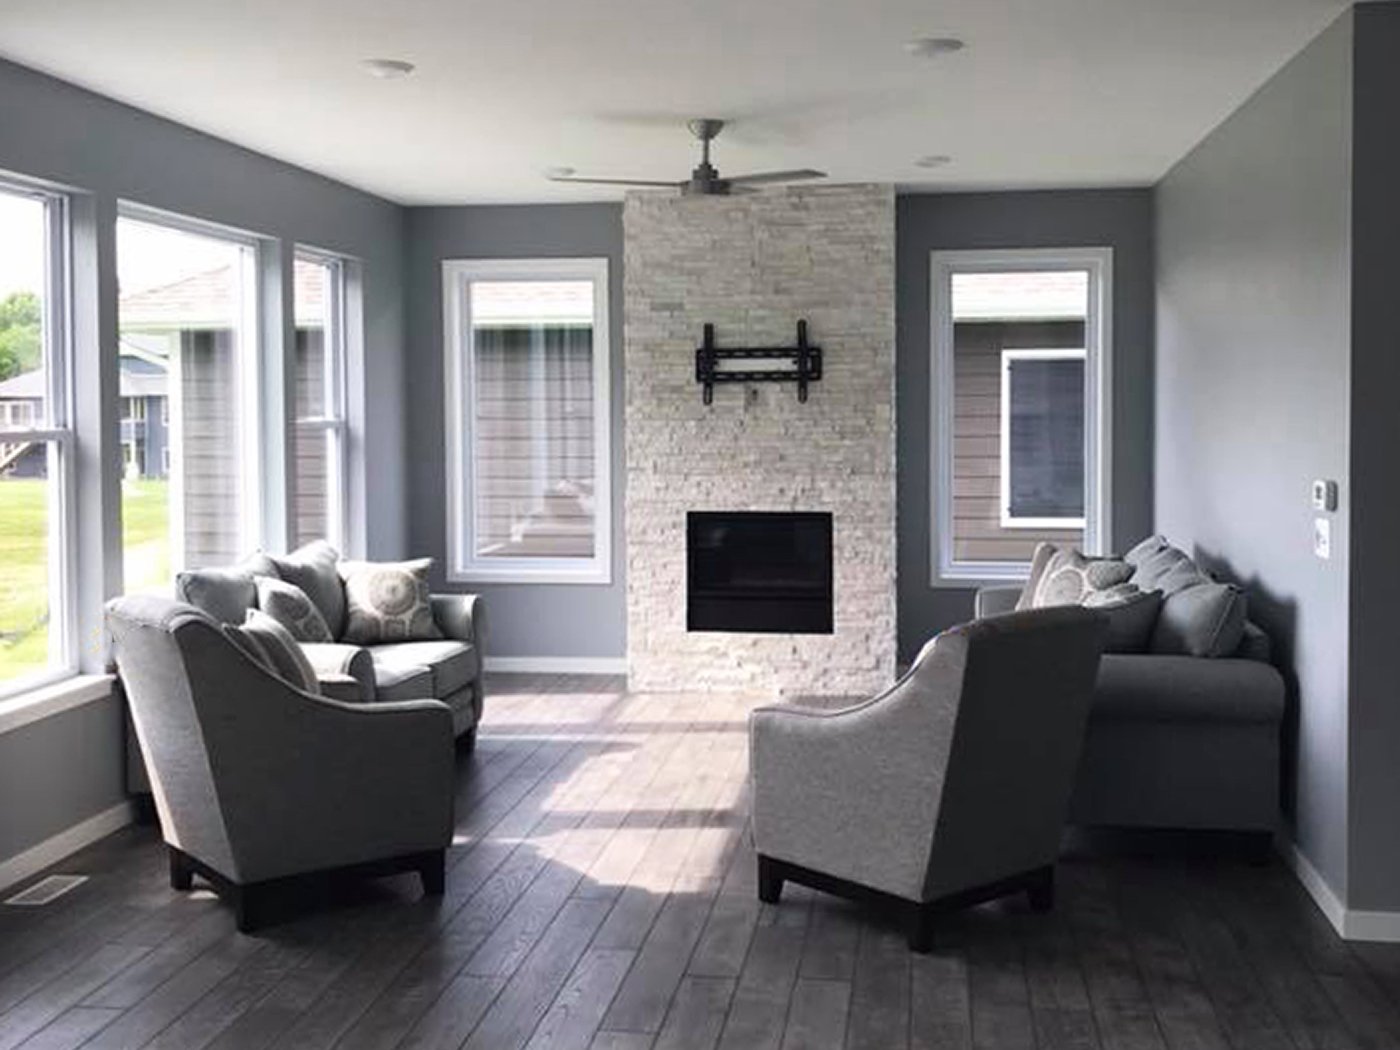 SGA Construction new home interior with fire place and grey furniture